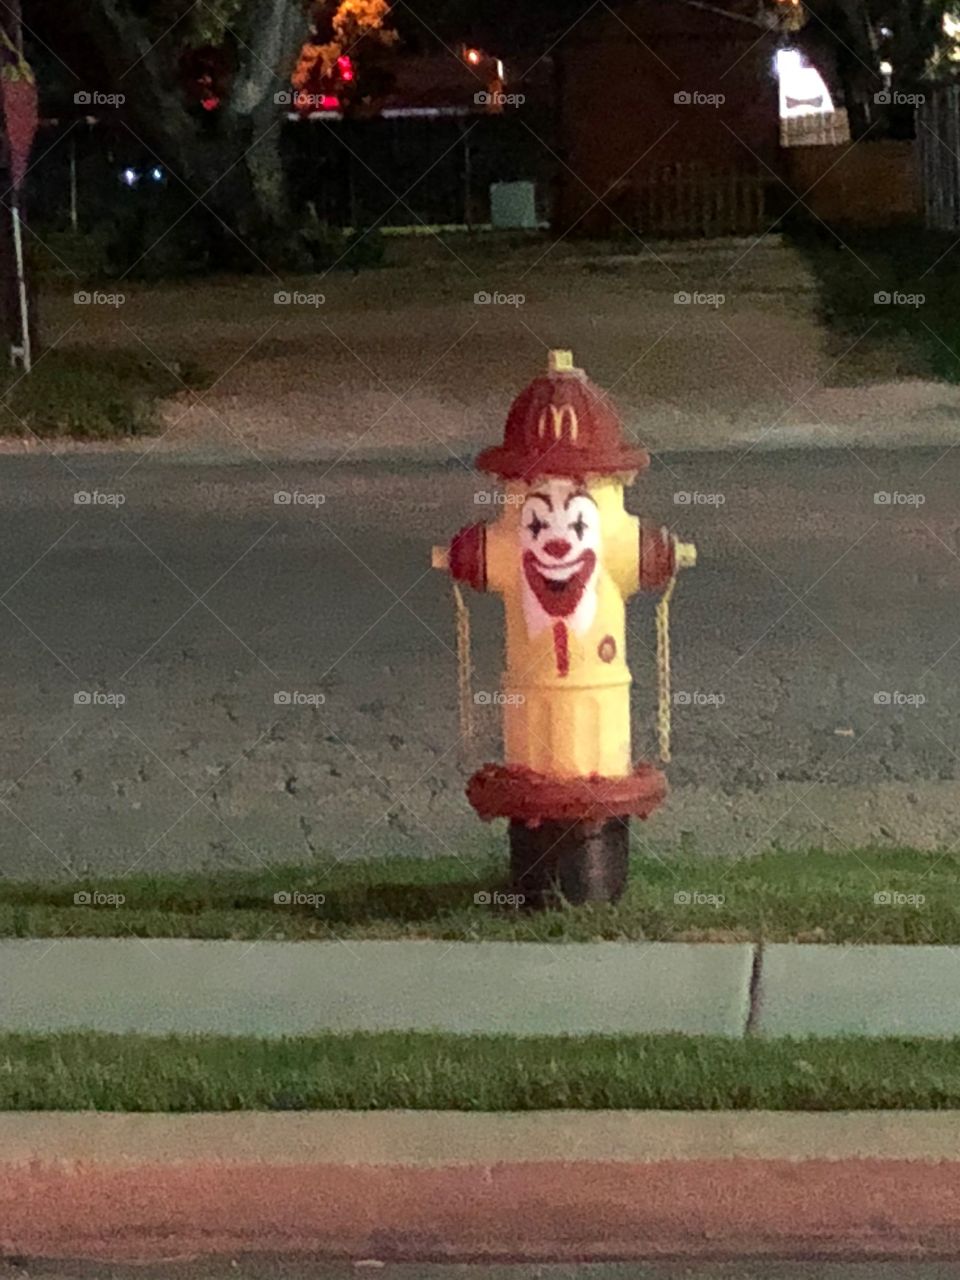 McDonald’s interesting advertising I saw on a road trip 